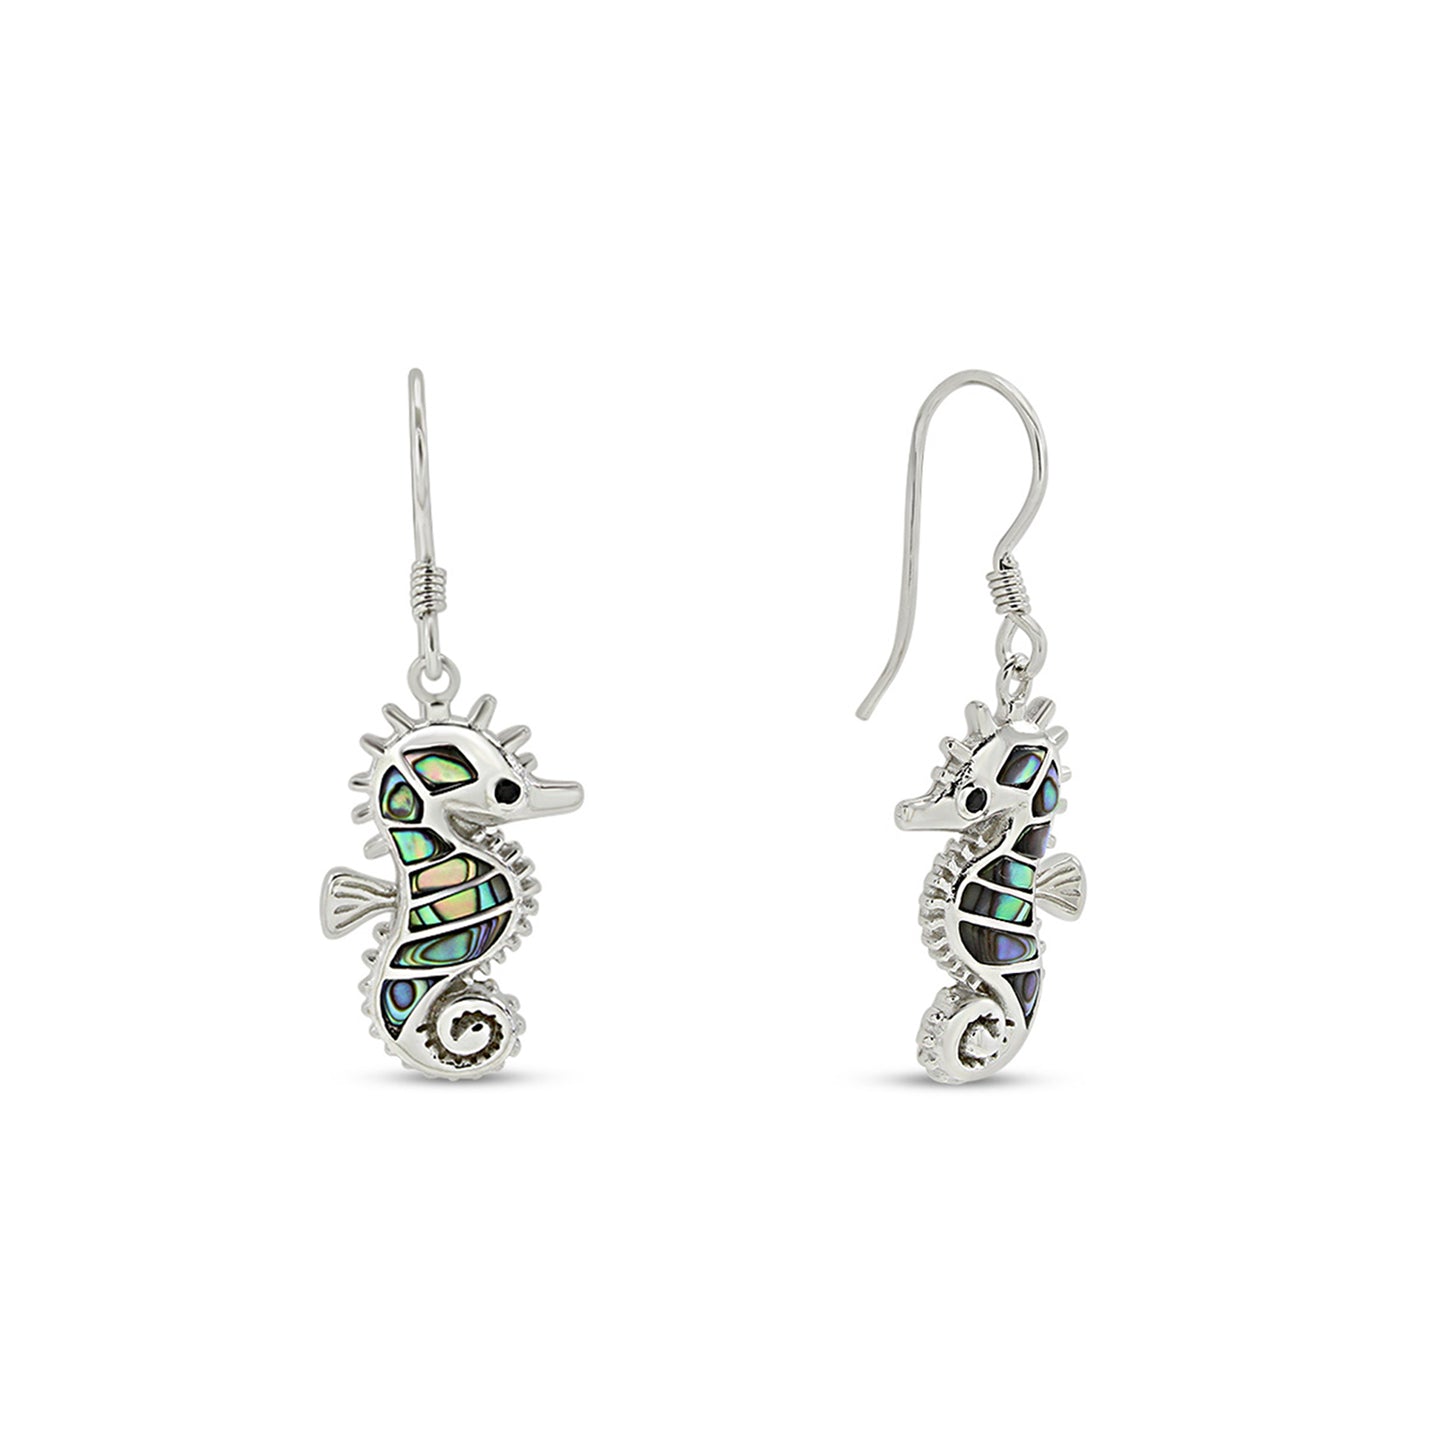 Abalone Shell Animal (Kiwi Bird, Cat and Seahorse) Dangle Earrings In 14K White Gold Over Sterling Silver